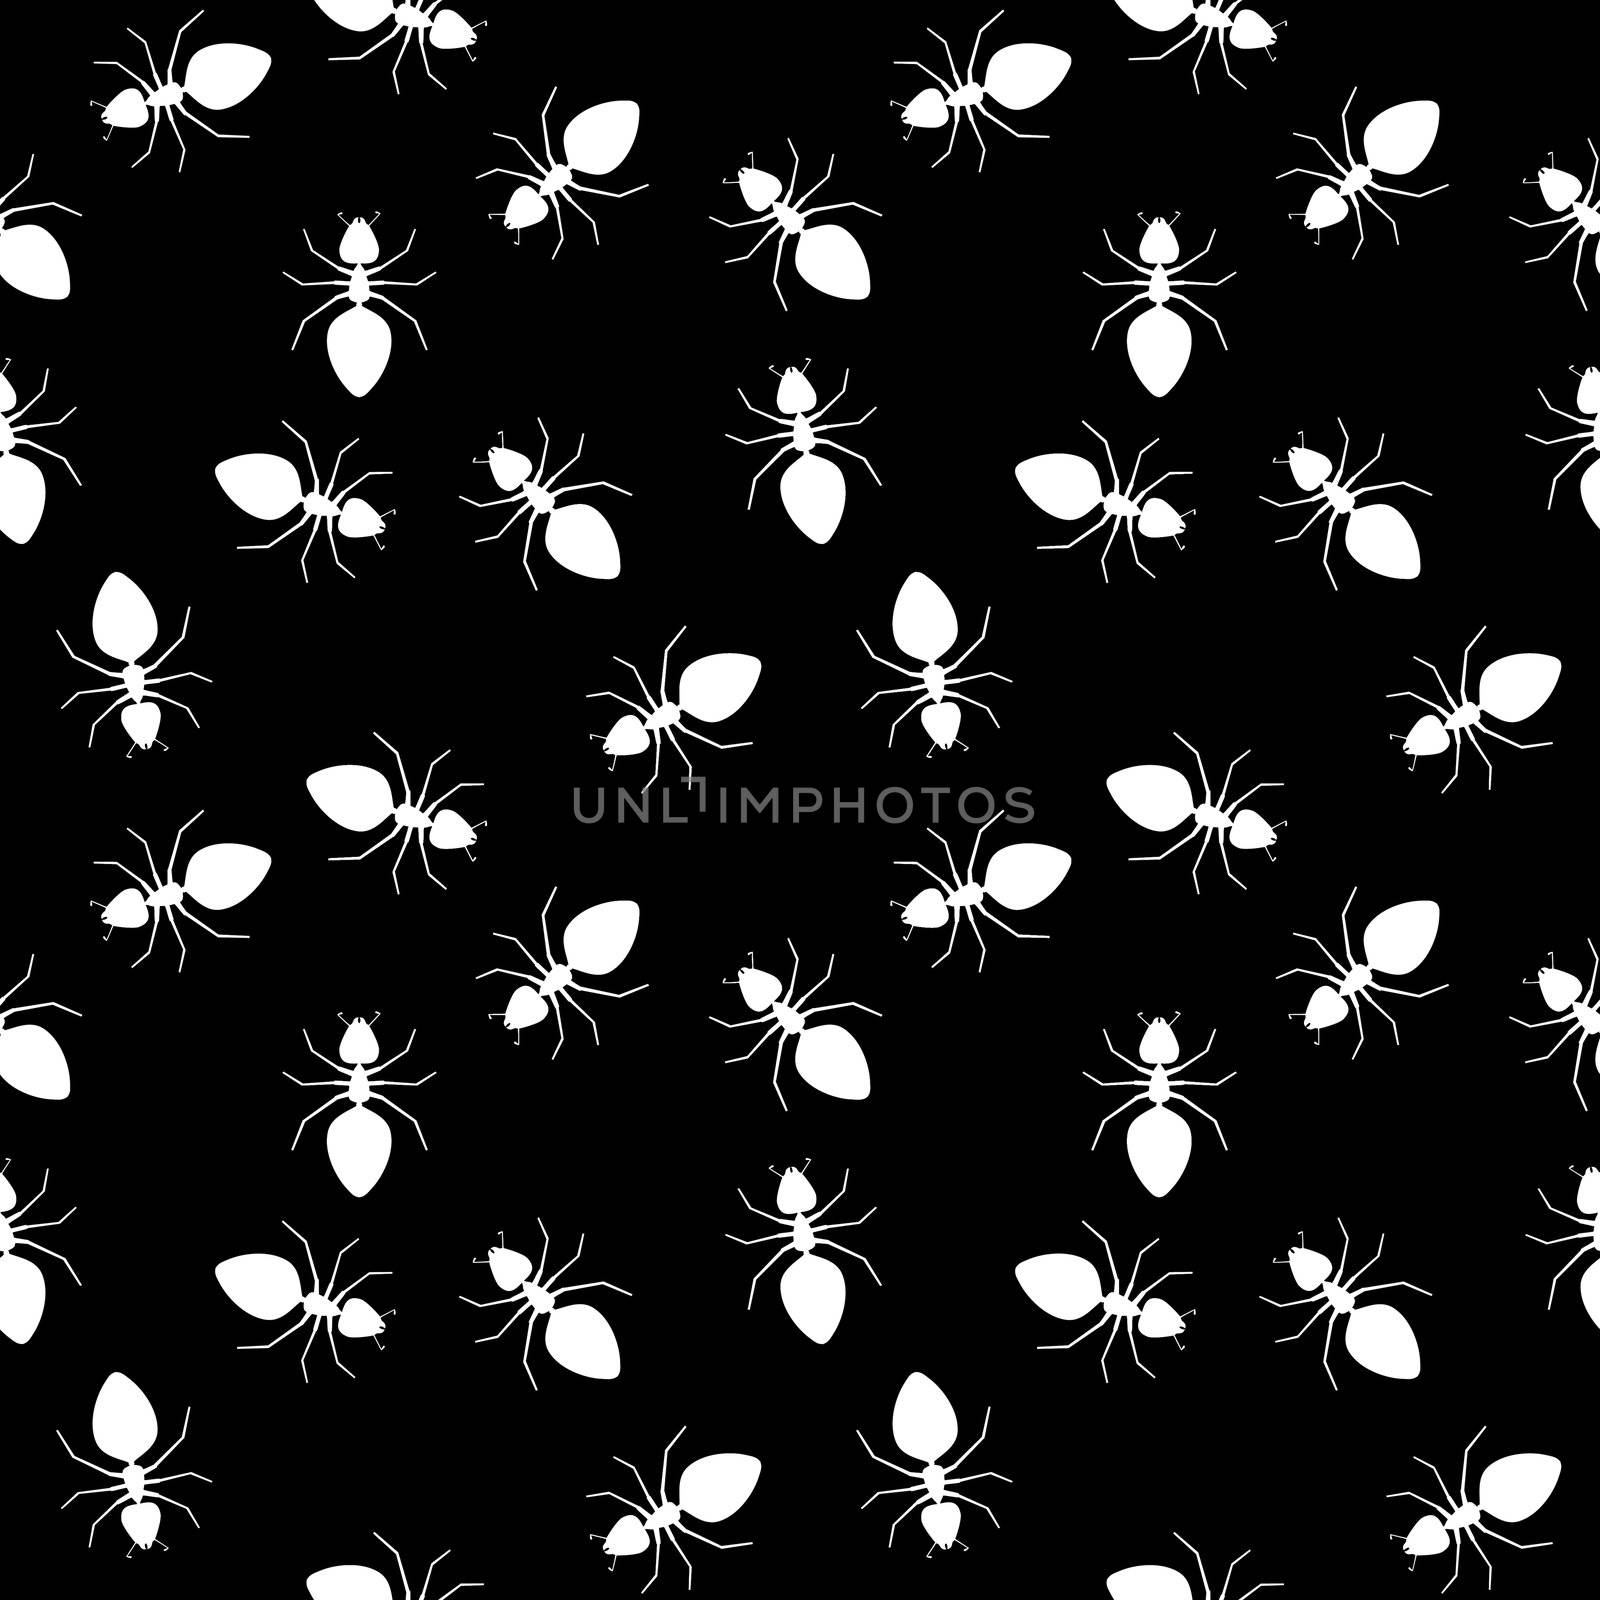 Seamless texture - insects parasites on a black background